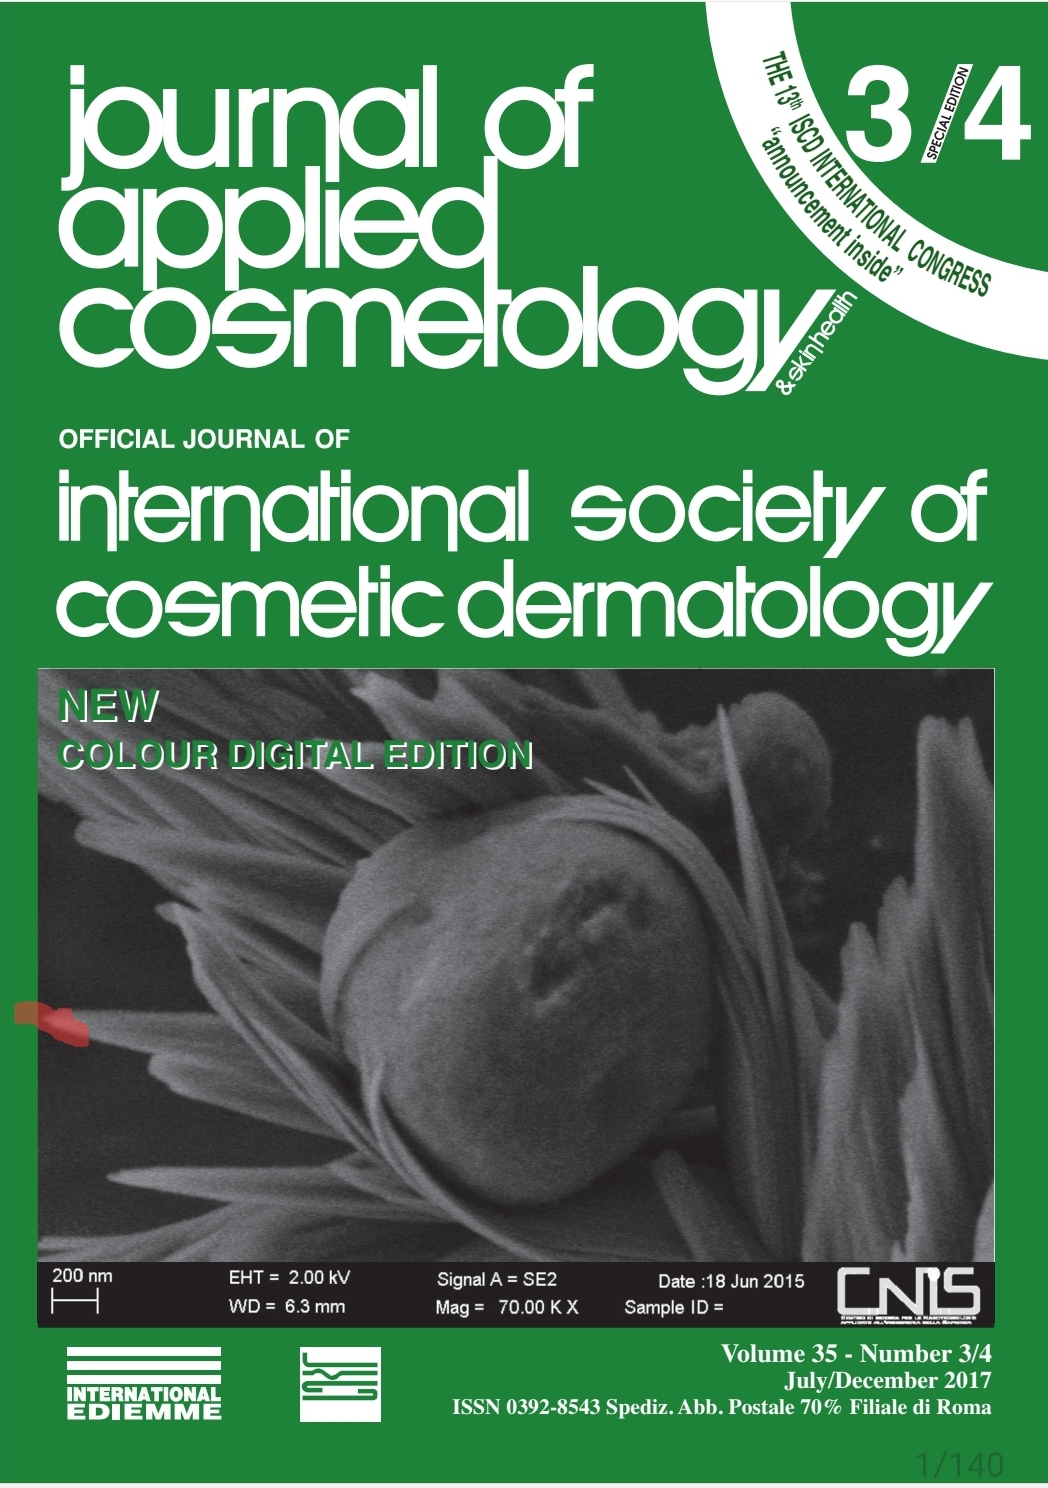 					View Vol. 35 No. 3/4 (2017): Journal of Applied Cosmetology
				